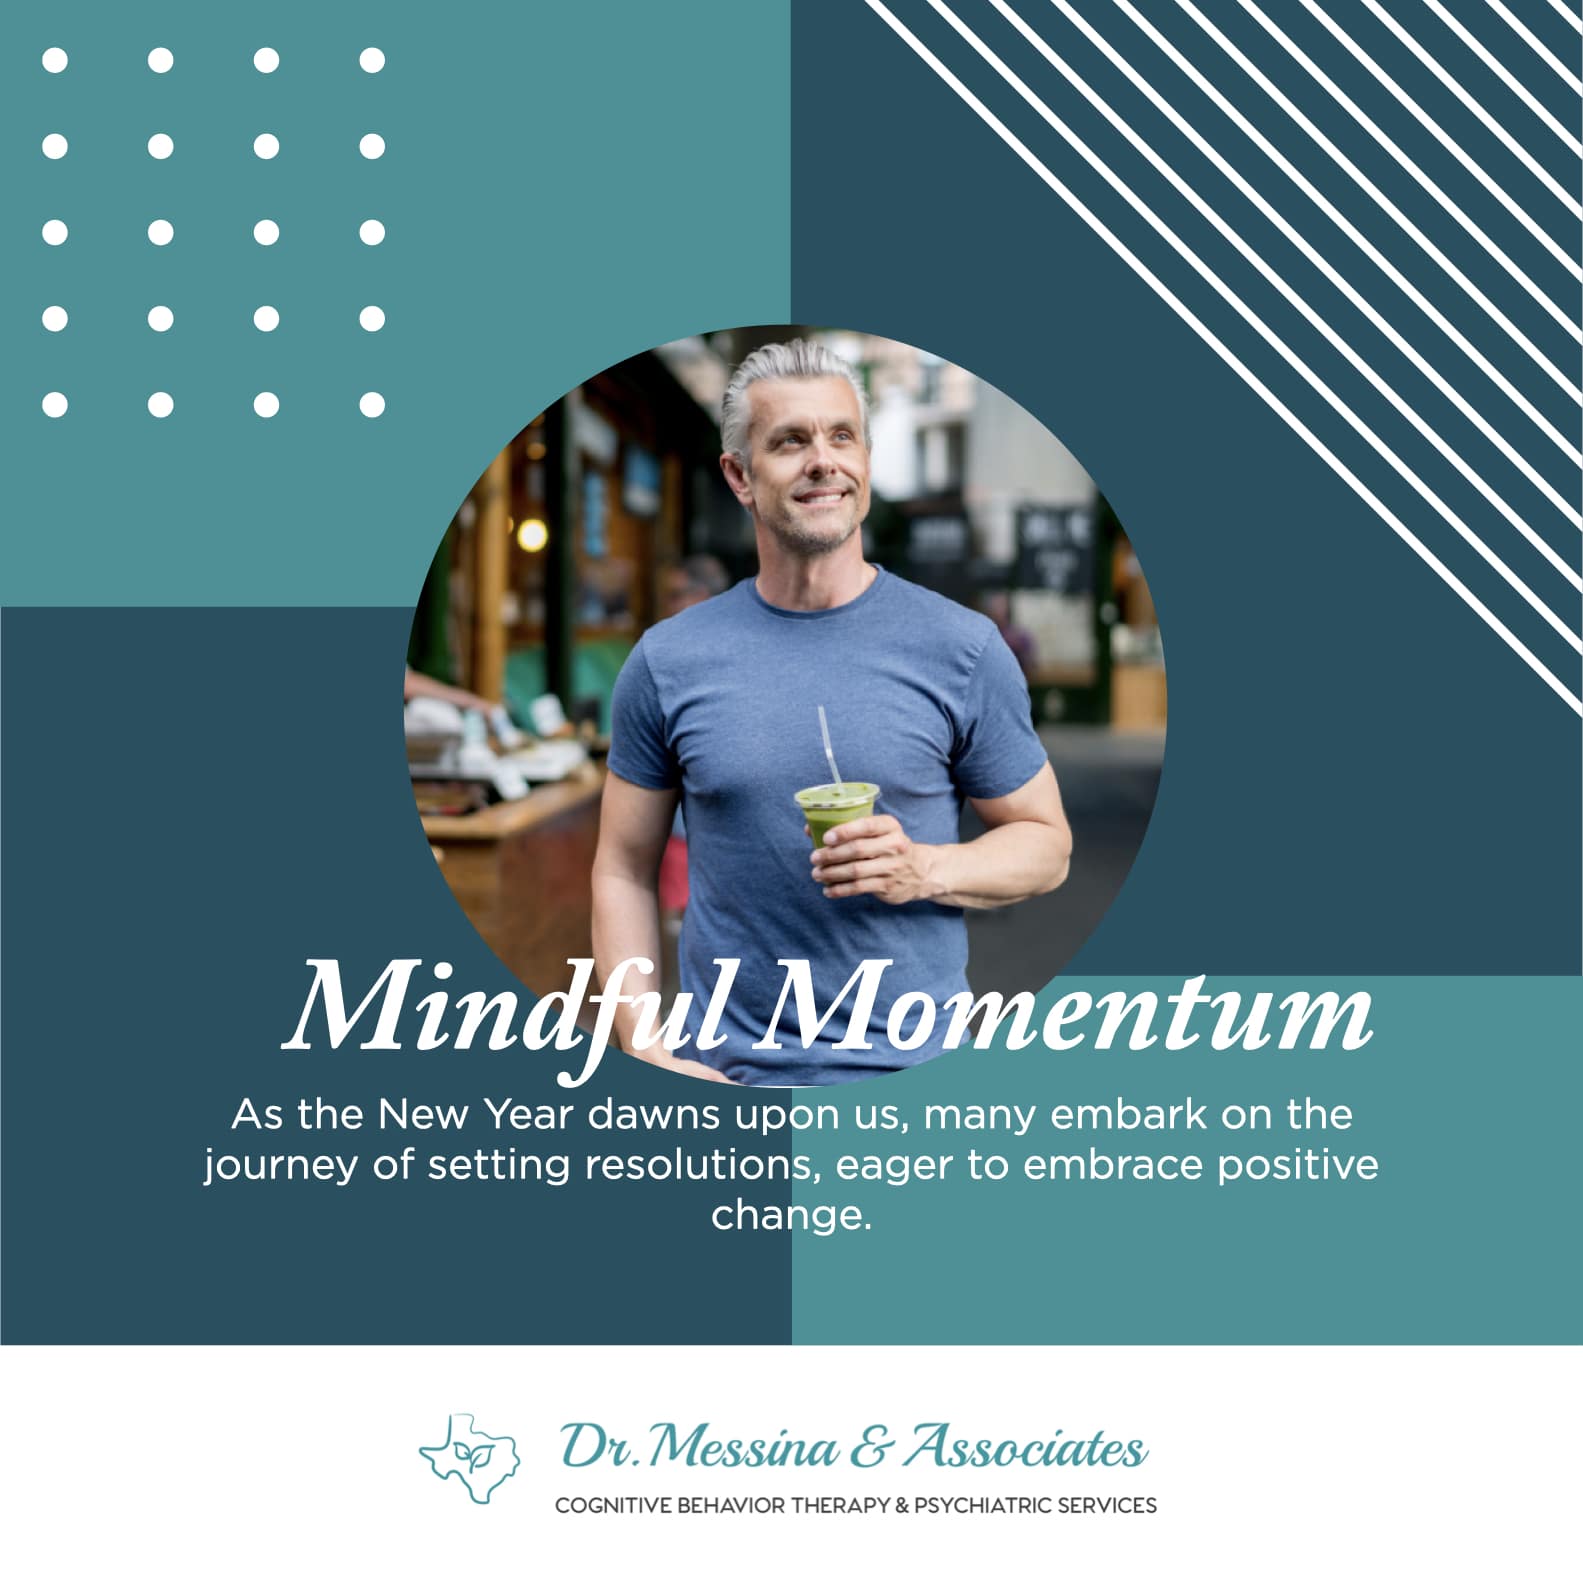 A man with a resolution for mindful momentum at the new year.